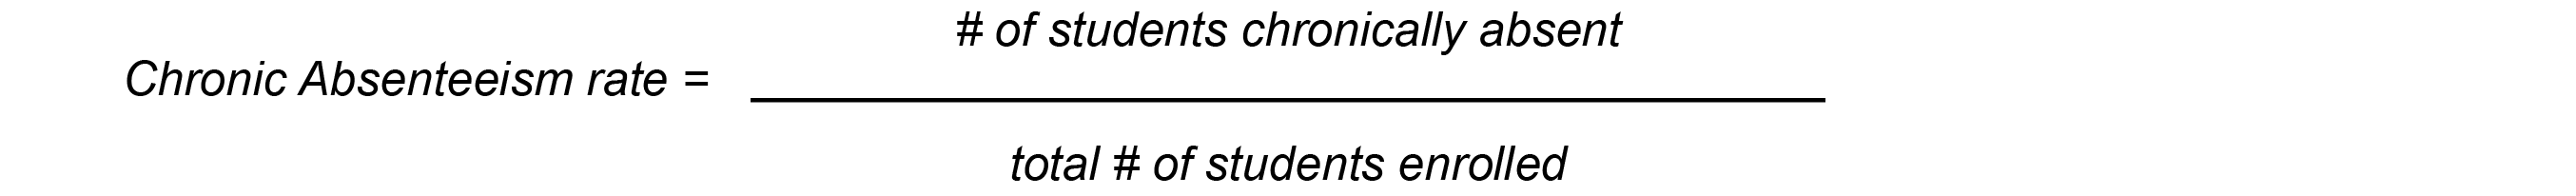 Chronic Absenteeism rate = # of students chronically absent / Total # of students enrolled